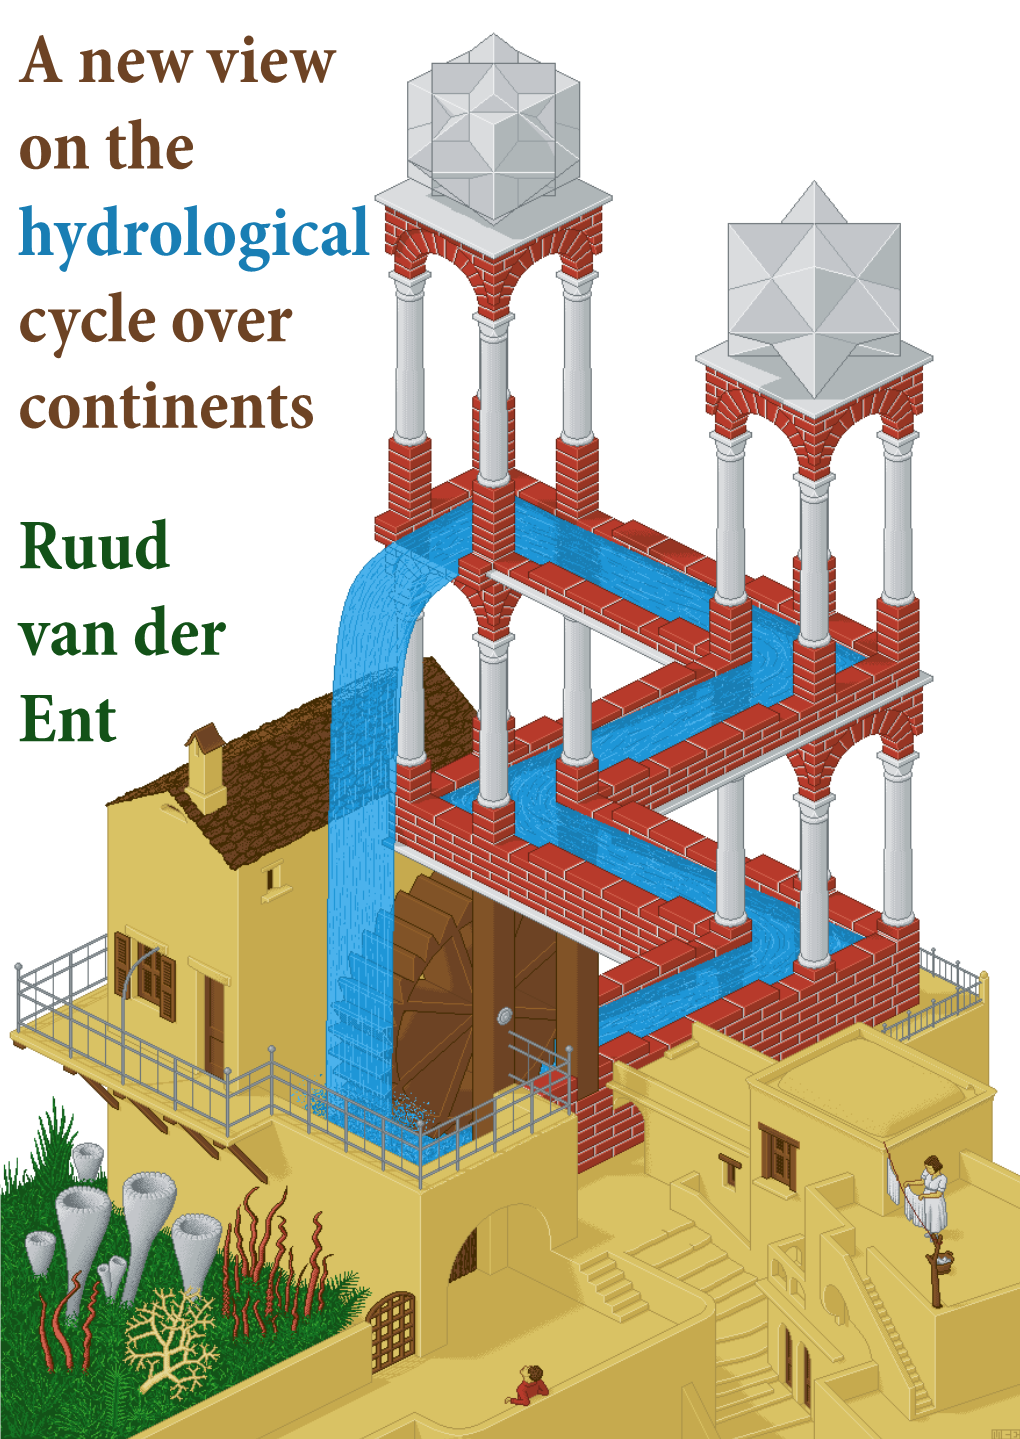 A New View on the Hydrological Cycle Over Continents Ruud Van Der Ent